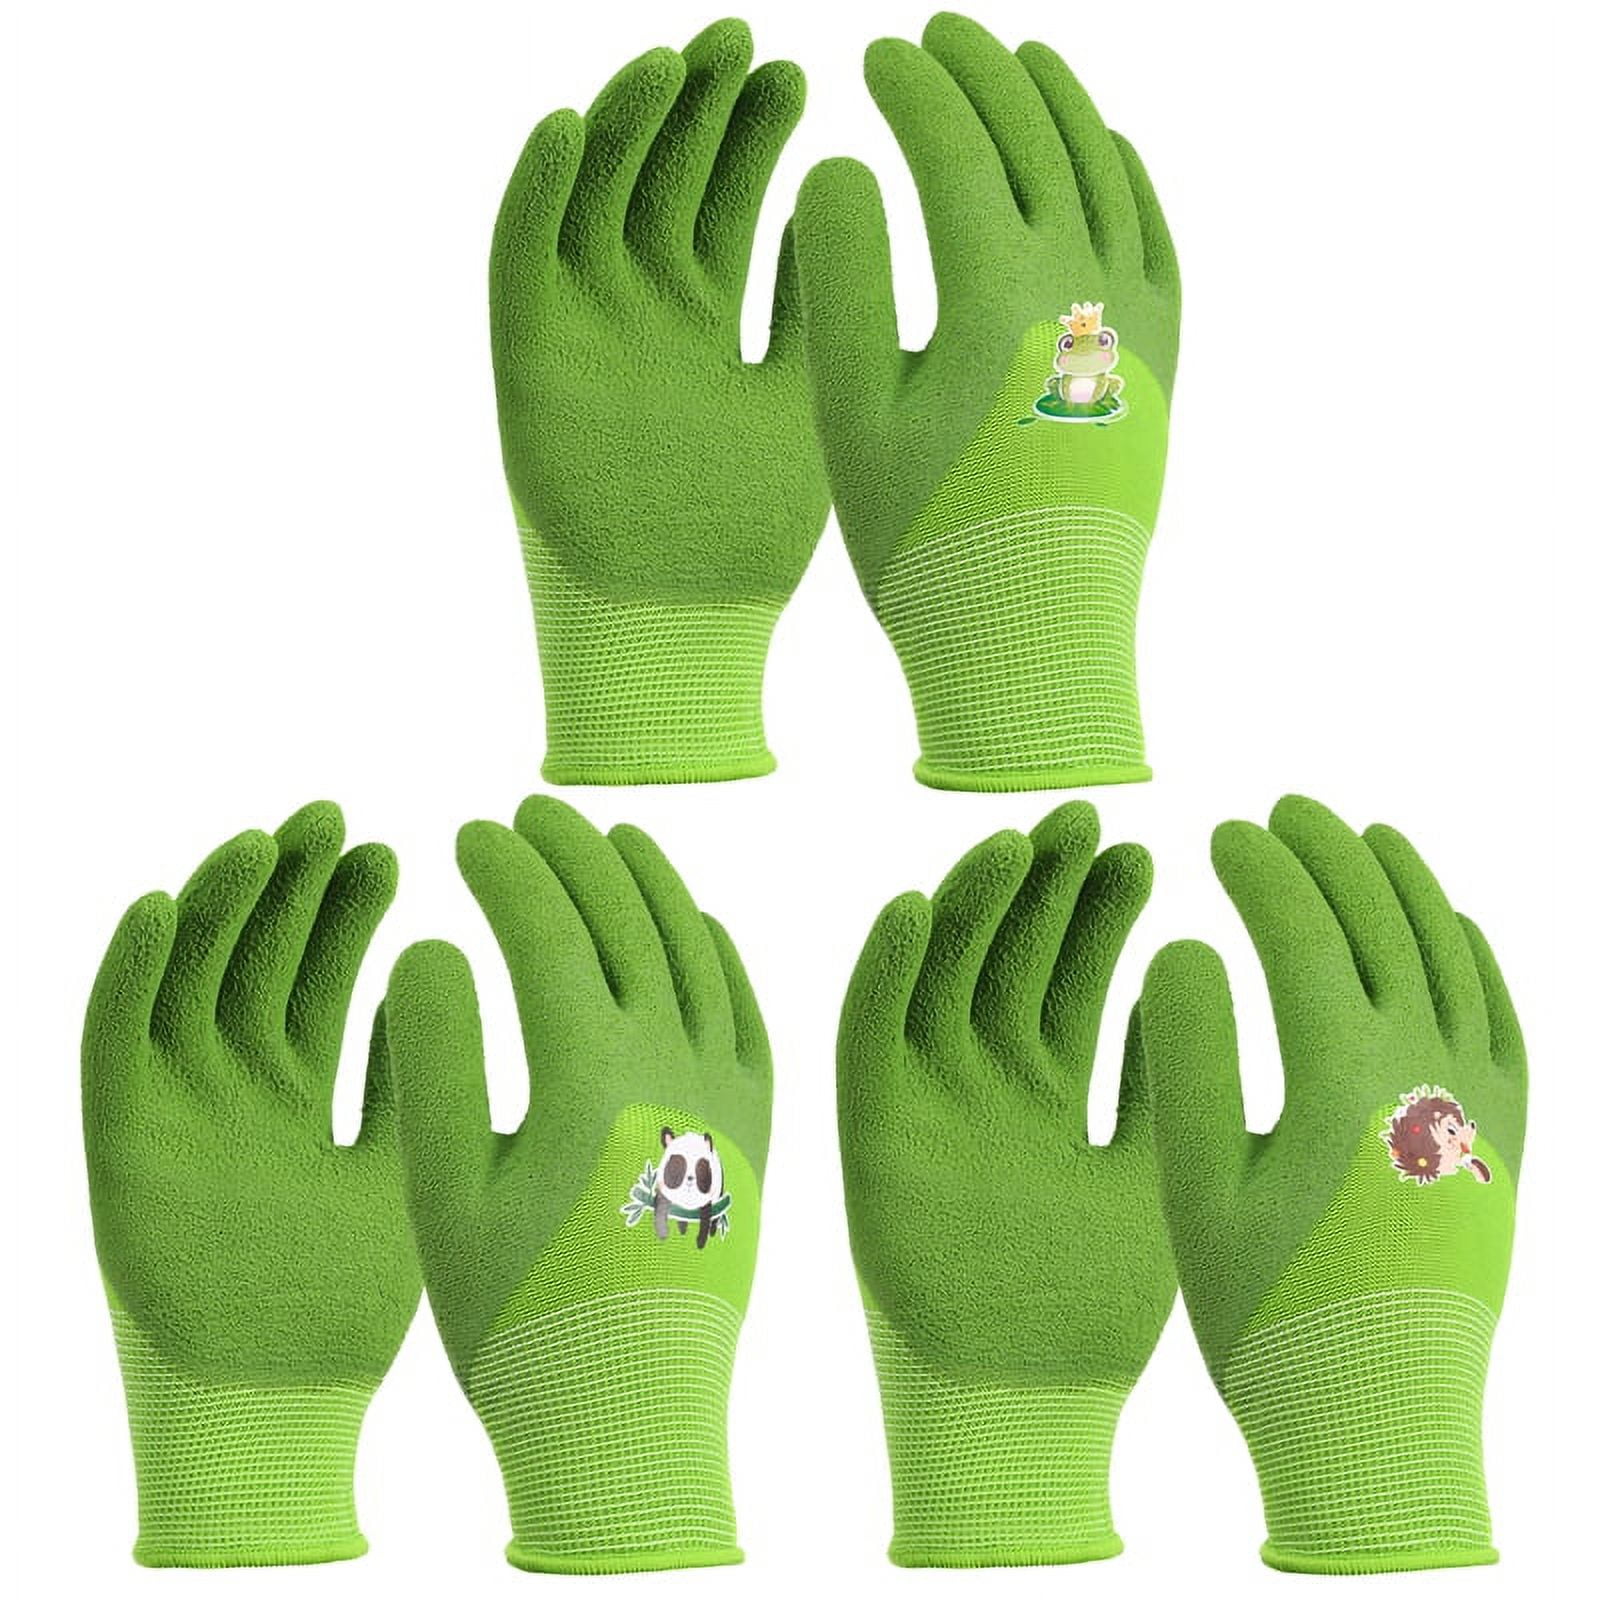 COOLJOB 2 Pairs Breathable Gardening Gloves for Women Small, Stretch Soft  Modal Base with Non-slip Rubber Coating, Palm Dipped Grip Work Gloves for